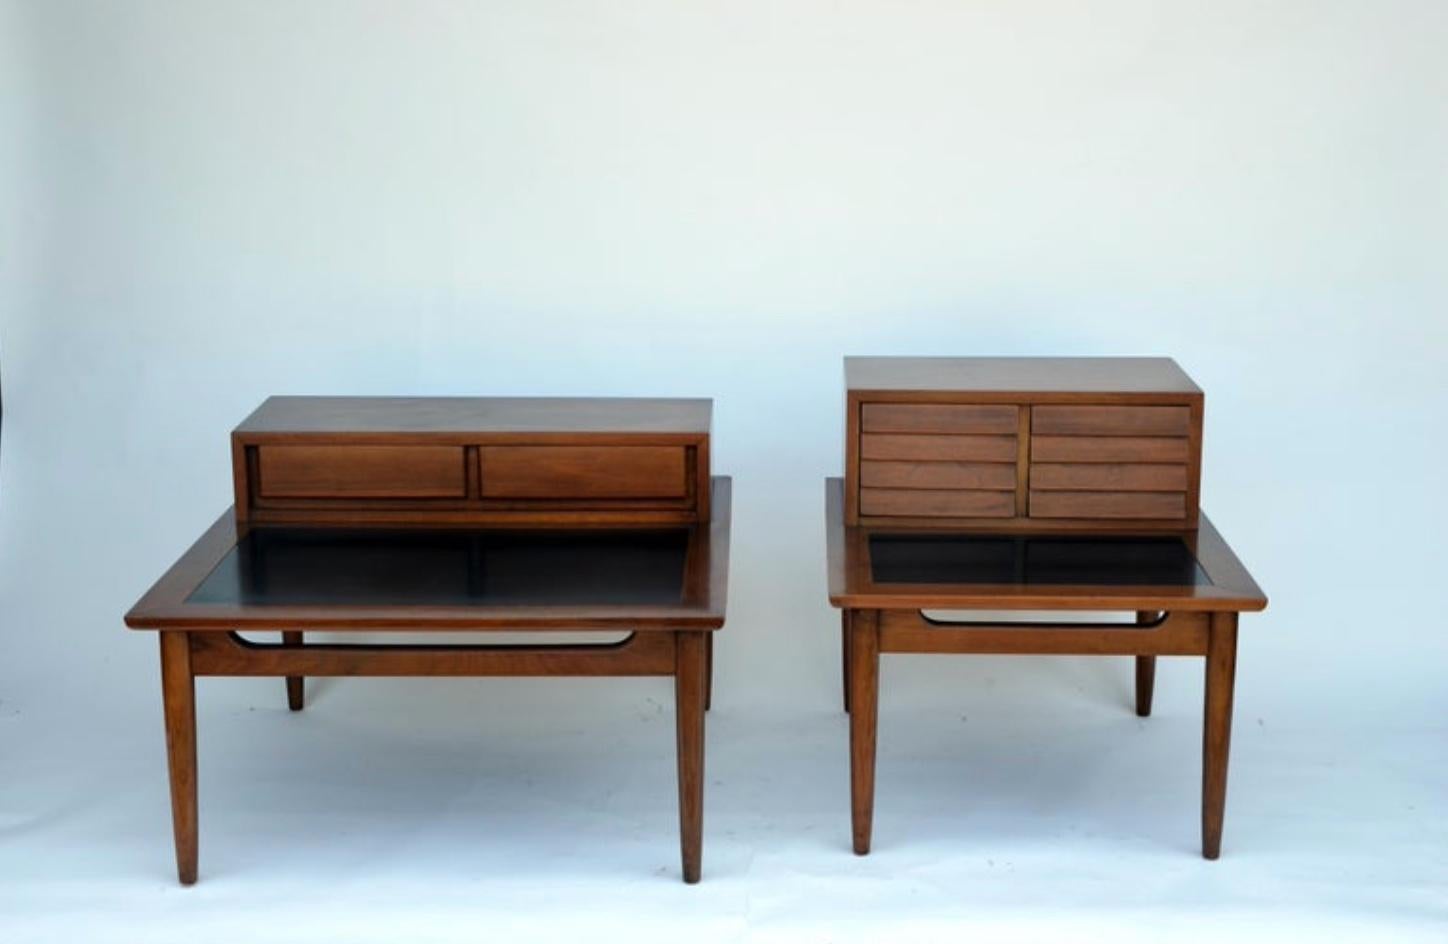 Two chic matching of vintage Mid-Century Modern end tables featuring louvered drawers and a bottom tier with a black laminate top. A sleek two-tier design made of walnut that sits on top of four tapered legs. Quality construction with four sculpted